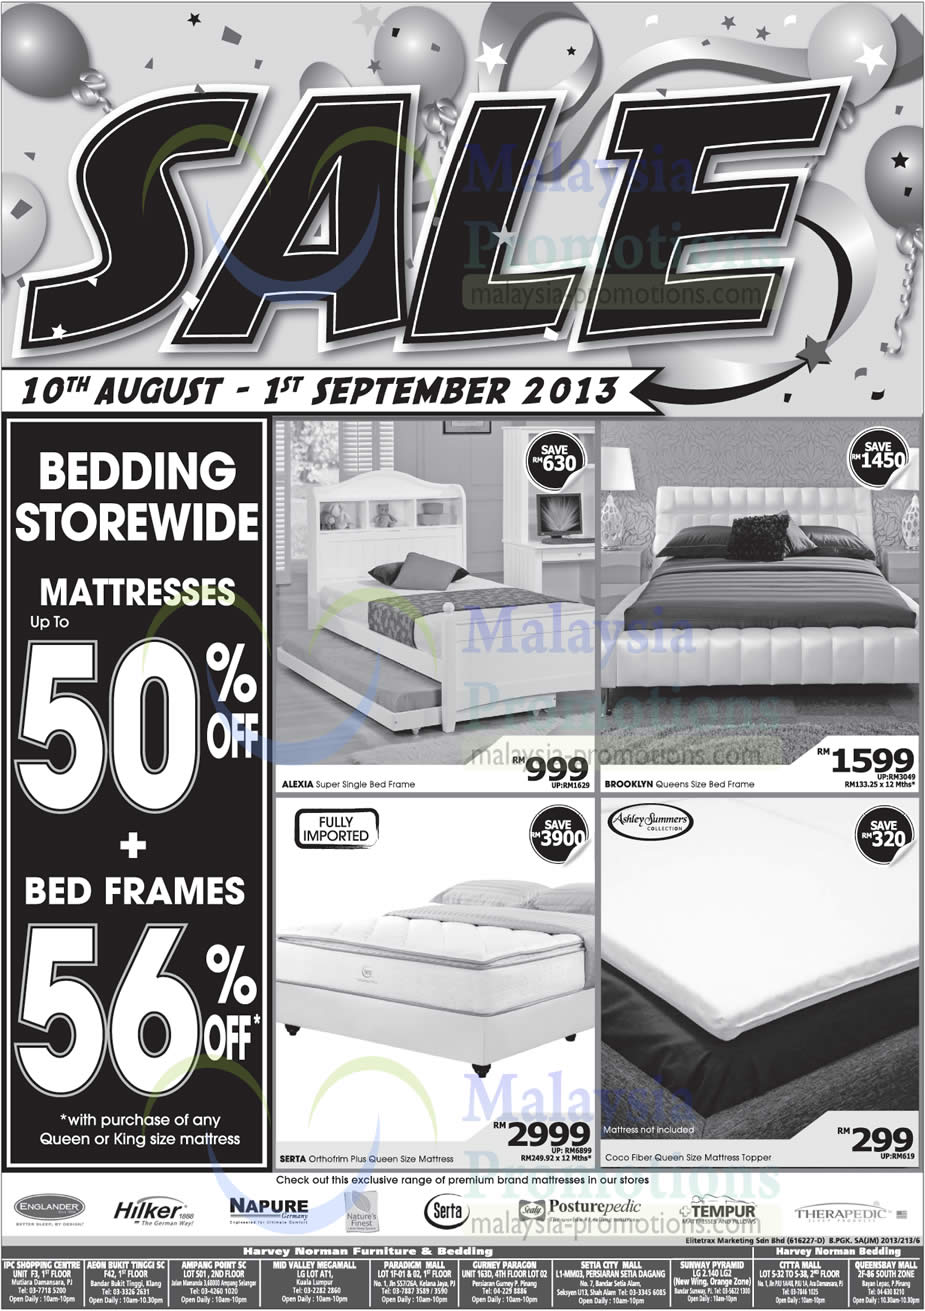 Featured image for Harvey Norman Digital Cameras, Furniture, Notebooks & Appliances Offers 24 - 30 Aug 2013